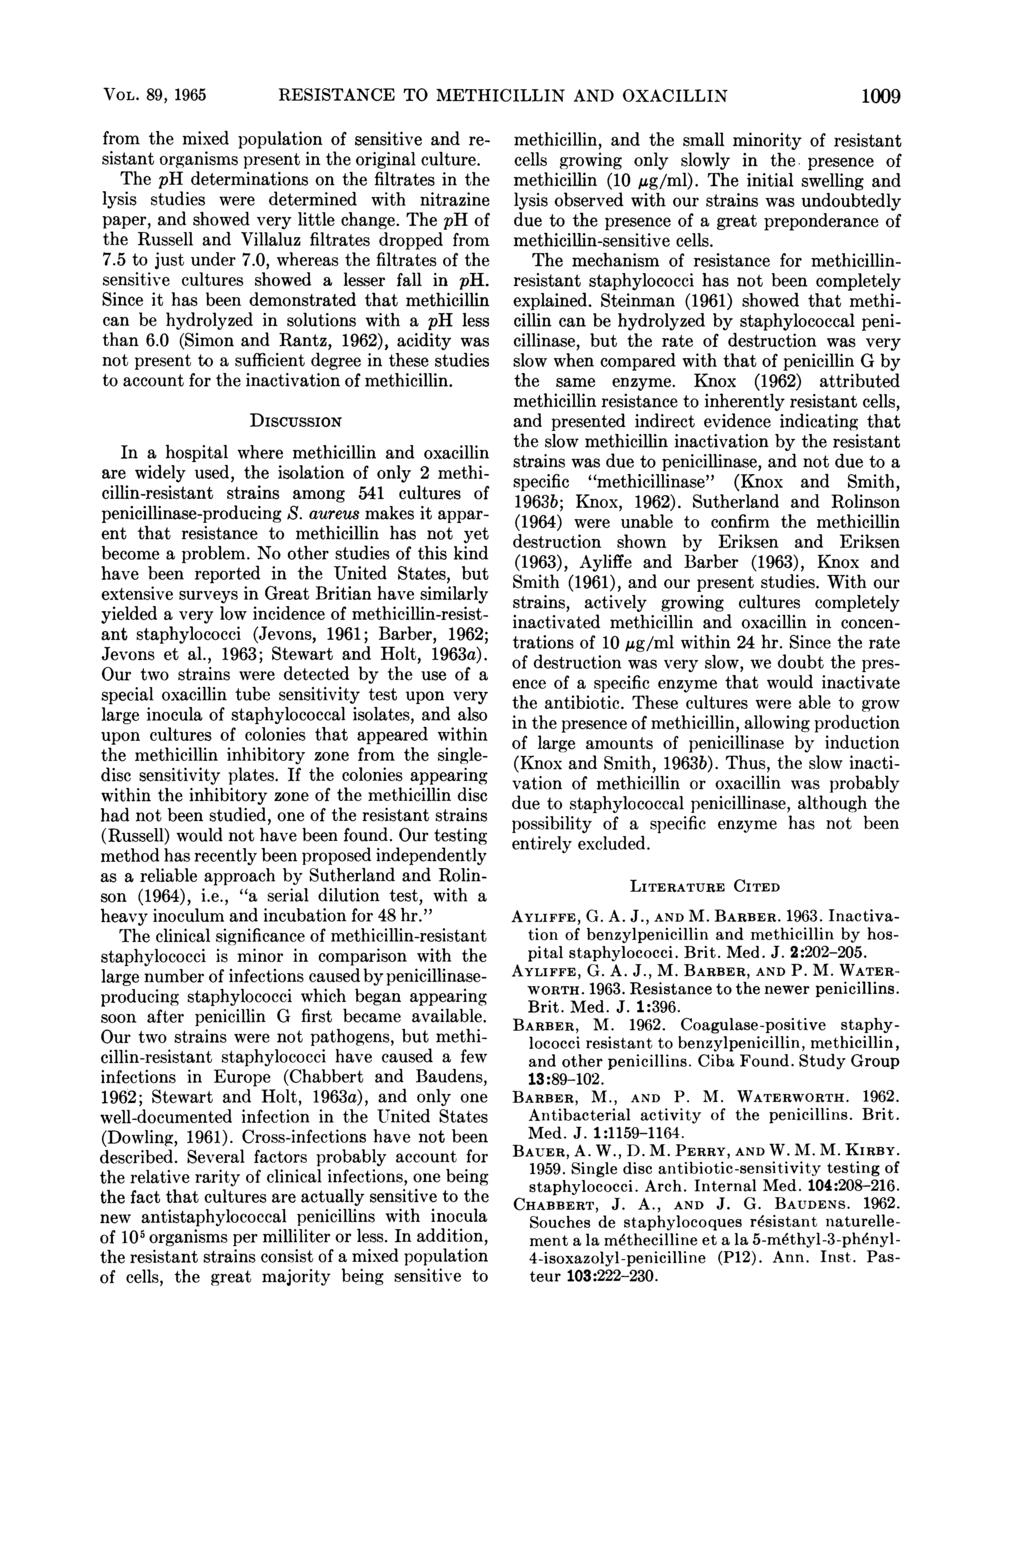 VOL. 89, 1965 RESISTANCE TO METHICILLIN AND OXACILLIN 1009 from the mixed population of sensitive and resistant organisms present in the original culture.